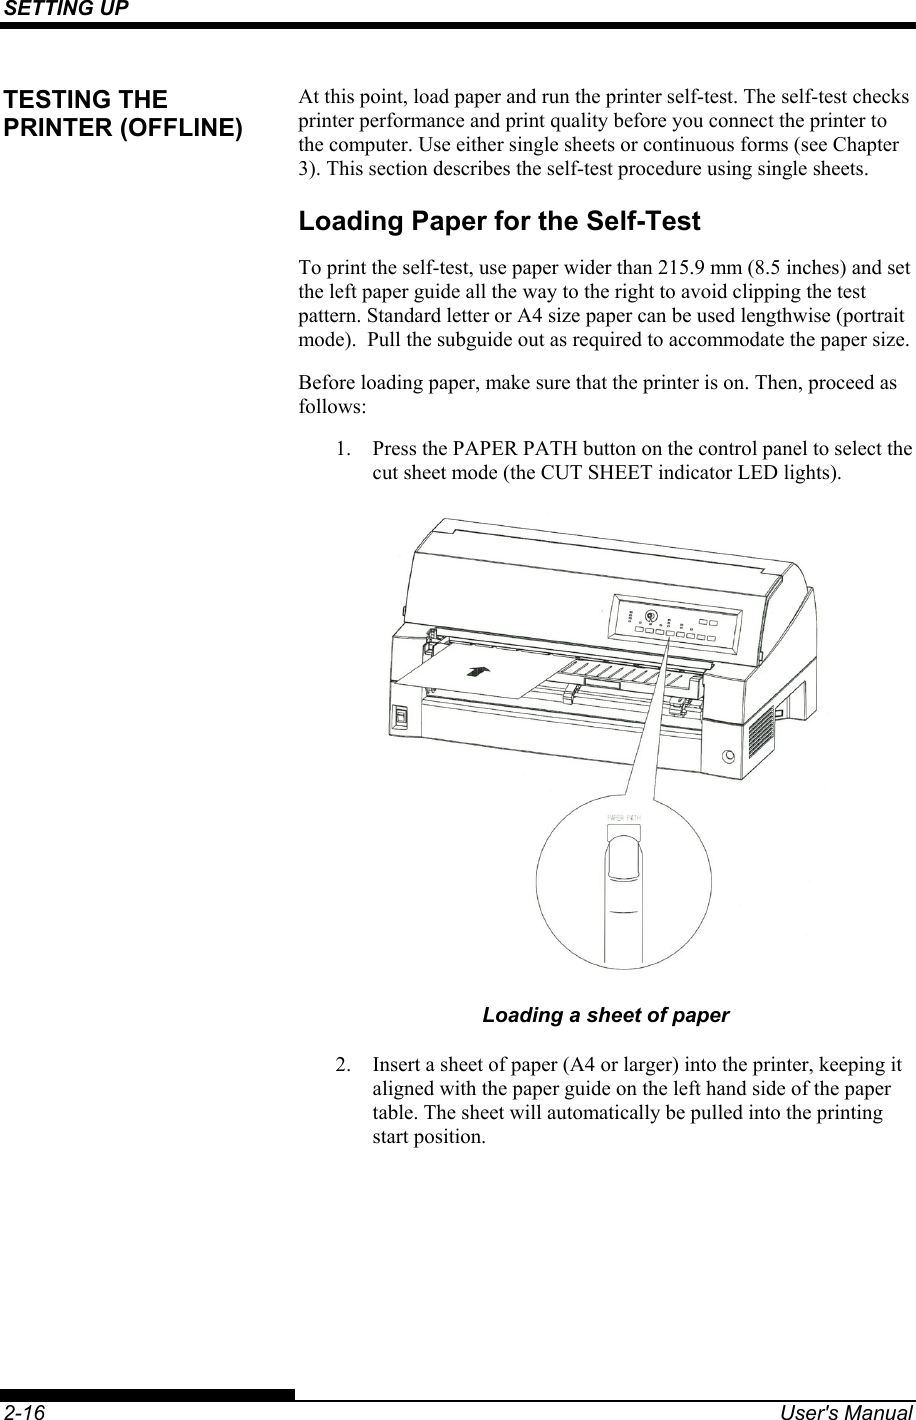 SETTING UP    2-16  User&apos;s Manual At this point, load paper and run the printer self-test. The self-test checks printer performance and print quality before you connect the printer to the computer. Use either single sheets or continuous forms (see Chapter 3). This section describes the self-test procedure using single sheets. Loading Paper for the Self-Test To print the self-test, use paper wider than 215.9 mm (8.5 inches) and set the left paper guide all the way to the right to avoid clipping the test pattern. Standard letter or A4 size paper can be used lengthwise (portrait mode).  Pull the subguide out as required to accommodate the paper size. Before loading paper, make sure that the printer is on. Then, proceed as follows: 1.  Press the PAPER PATH button on the control panel to select the cut sheet mode (the CUT SHEET indicator LED lights).  Loading a sheet of paper 2.  Insert a sheet of paper (A4 or larger) into the printer, keeping it aligned with the paper guide on the left hand side of the paper table. The sheet will automatically be pulled into the printing start position. TESTING THE PRINTER (OFFLINE) 